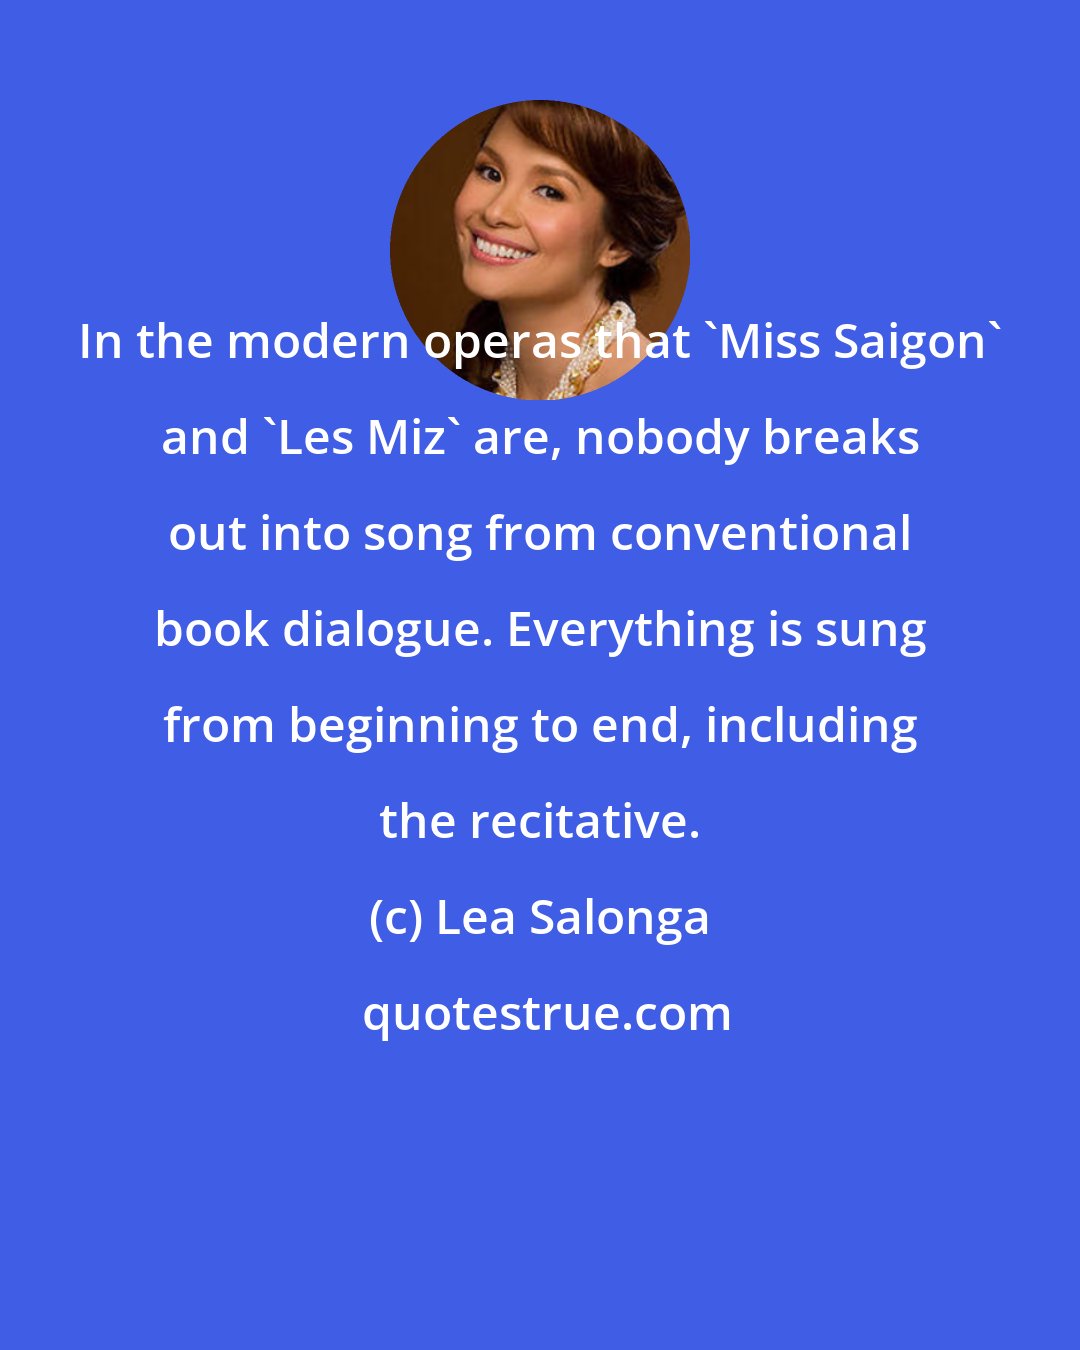 Lea Salonga: In the modern operas that 'Miss Saigon' and 'Les Miz' are, nobody breaks out into song from conventional book dialogue. Everything is sung from beginning to end, including the recitative.